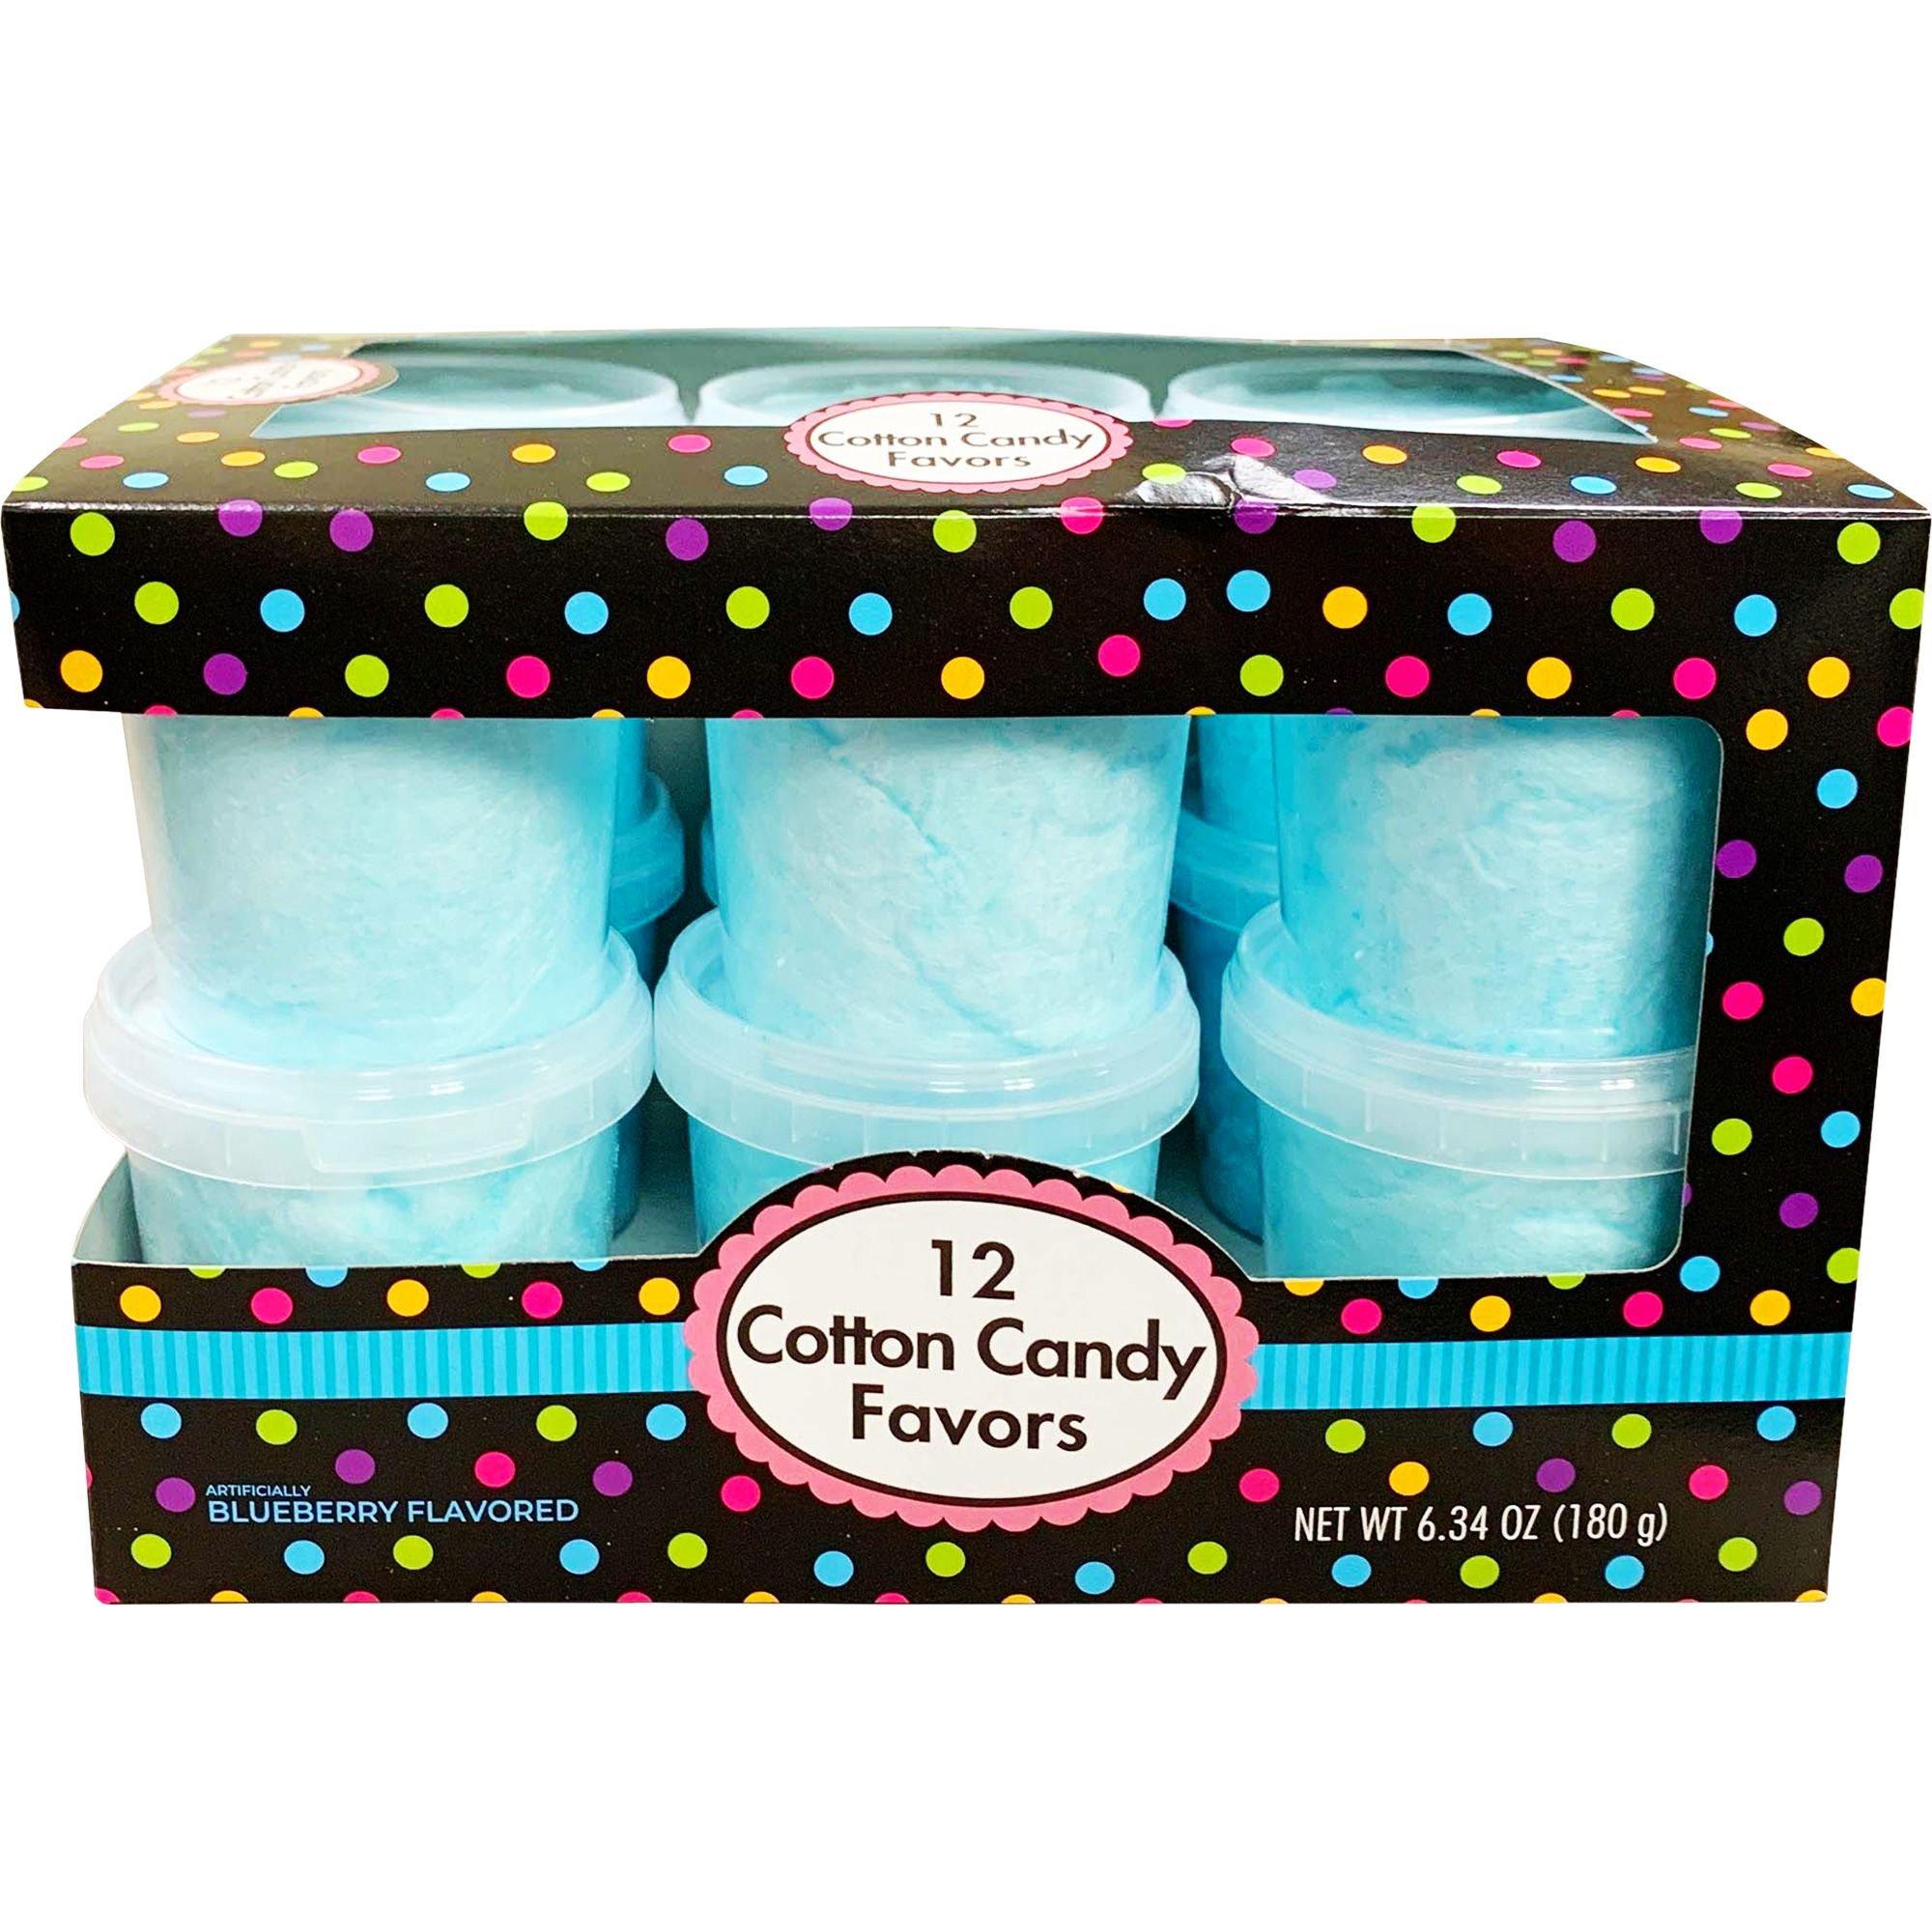 Blueberry Cotton Candy 12pc